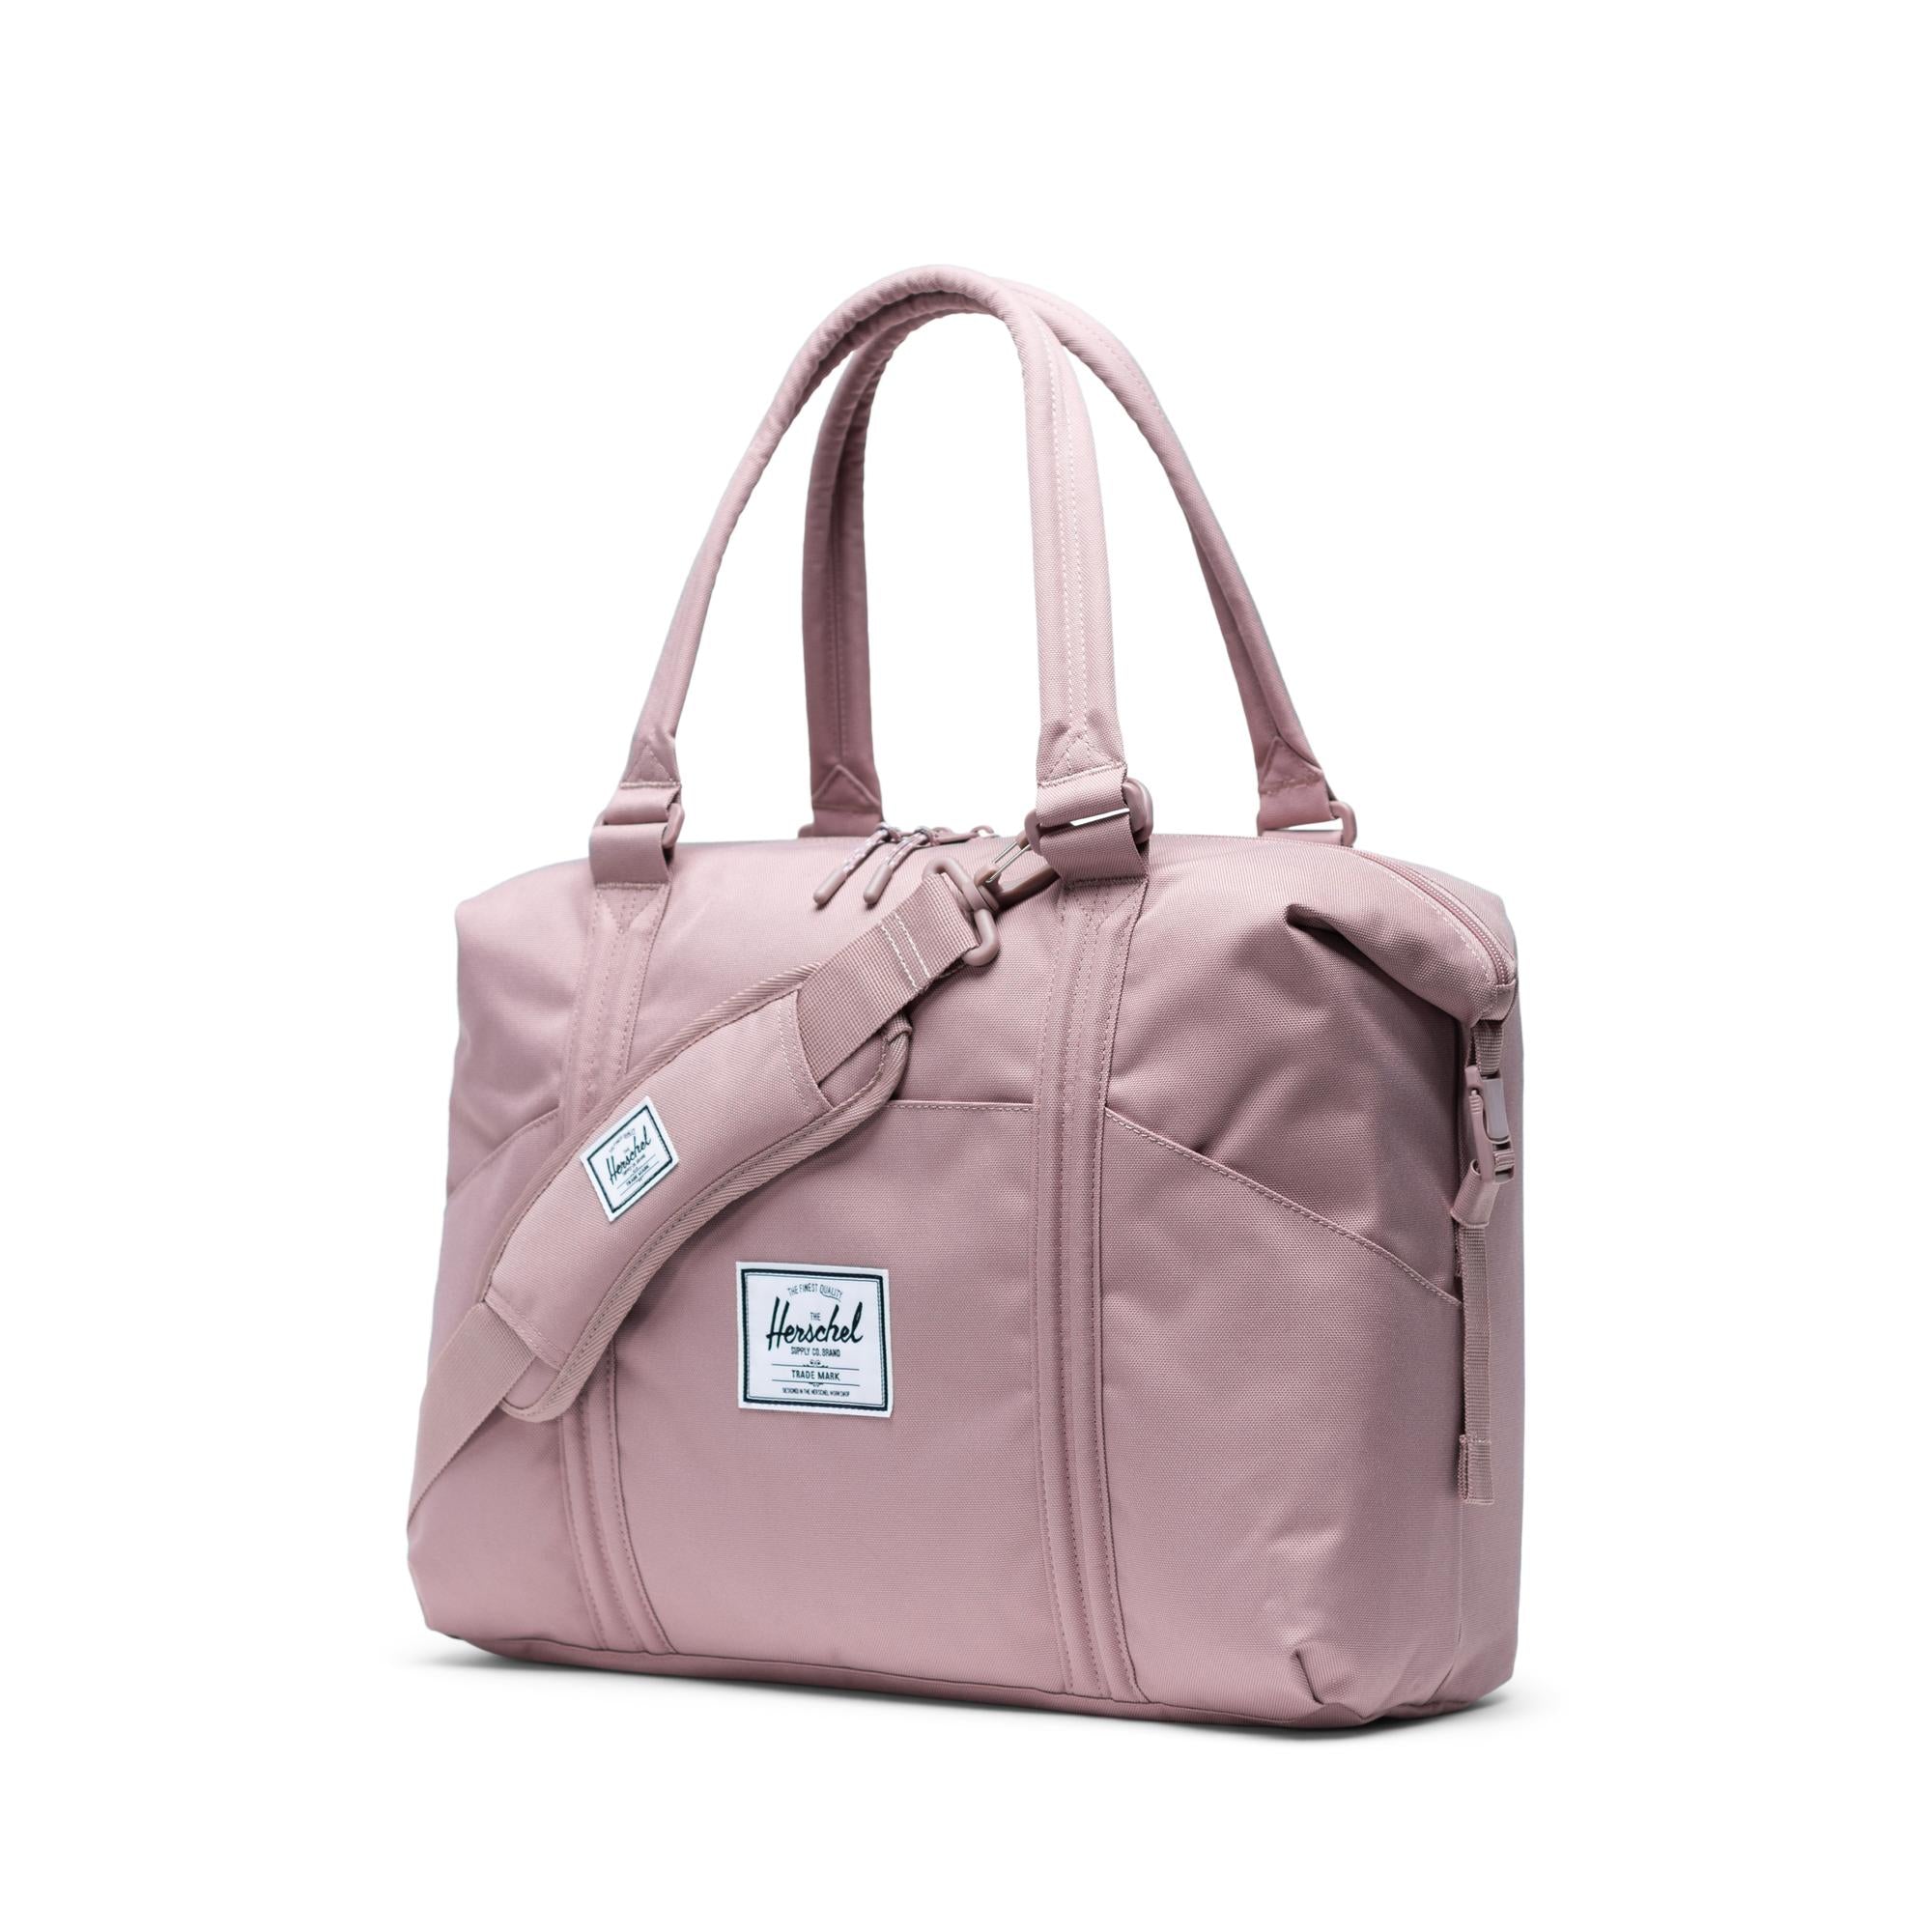 Herschel Supply Co. | Strand Sprout Tote Nappy Bag - Ash Rose